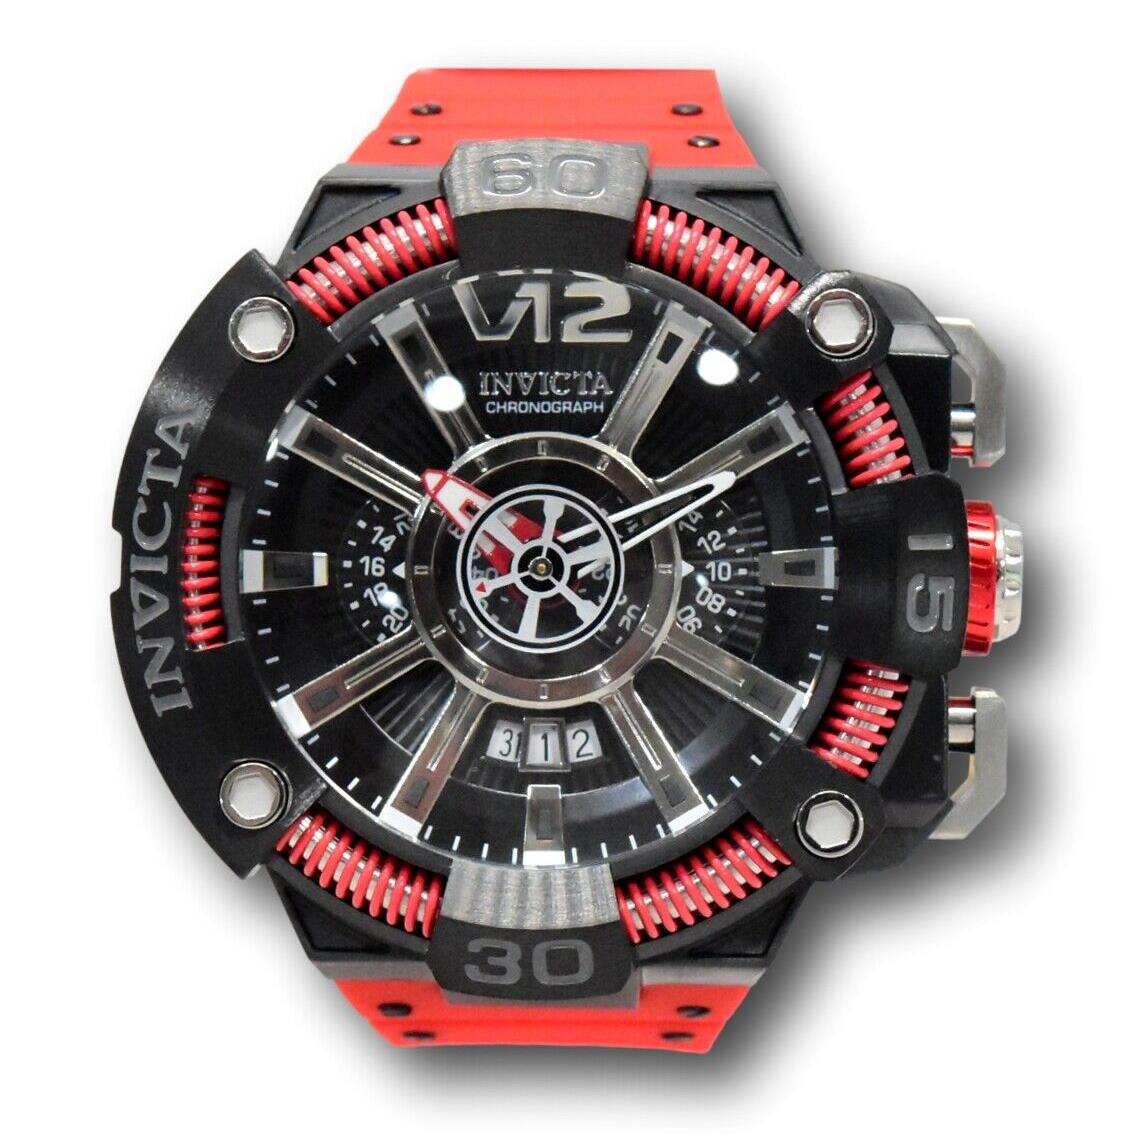 Invicta S1 Rally JM Correa Men`s 58mm Gmt Dual Time Large Black Red Watch 37655 - Dial: Black Silver White, Band: Red, Bezel: Black Gray Red